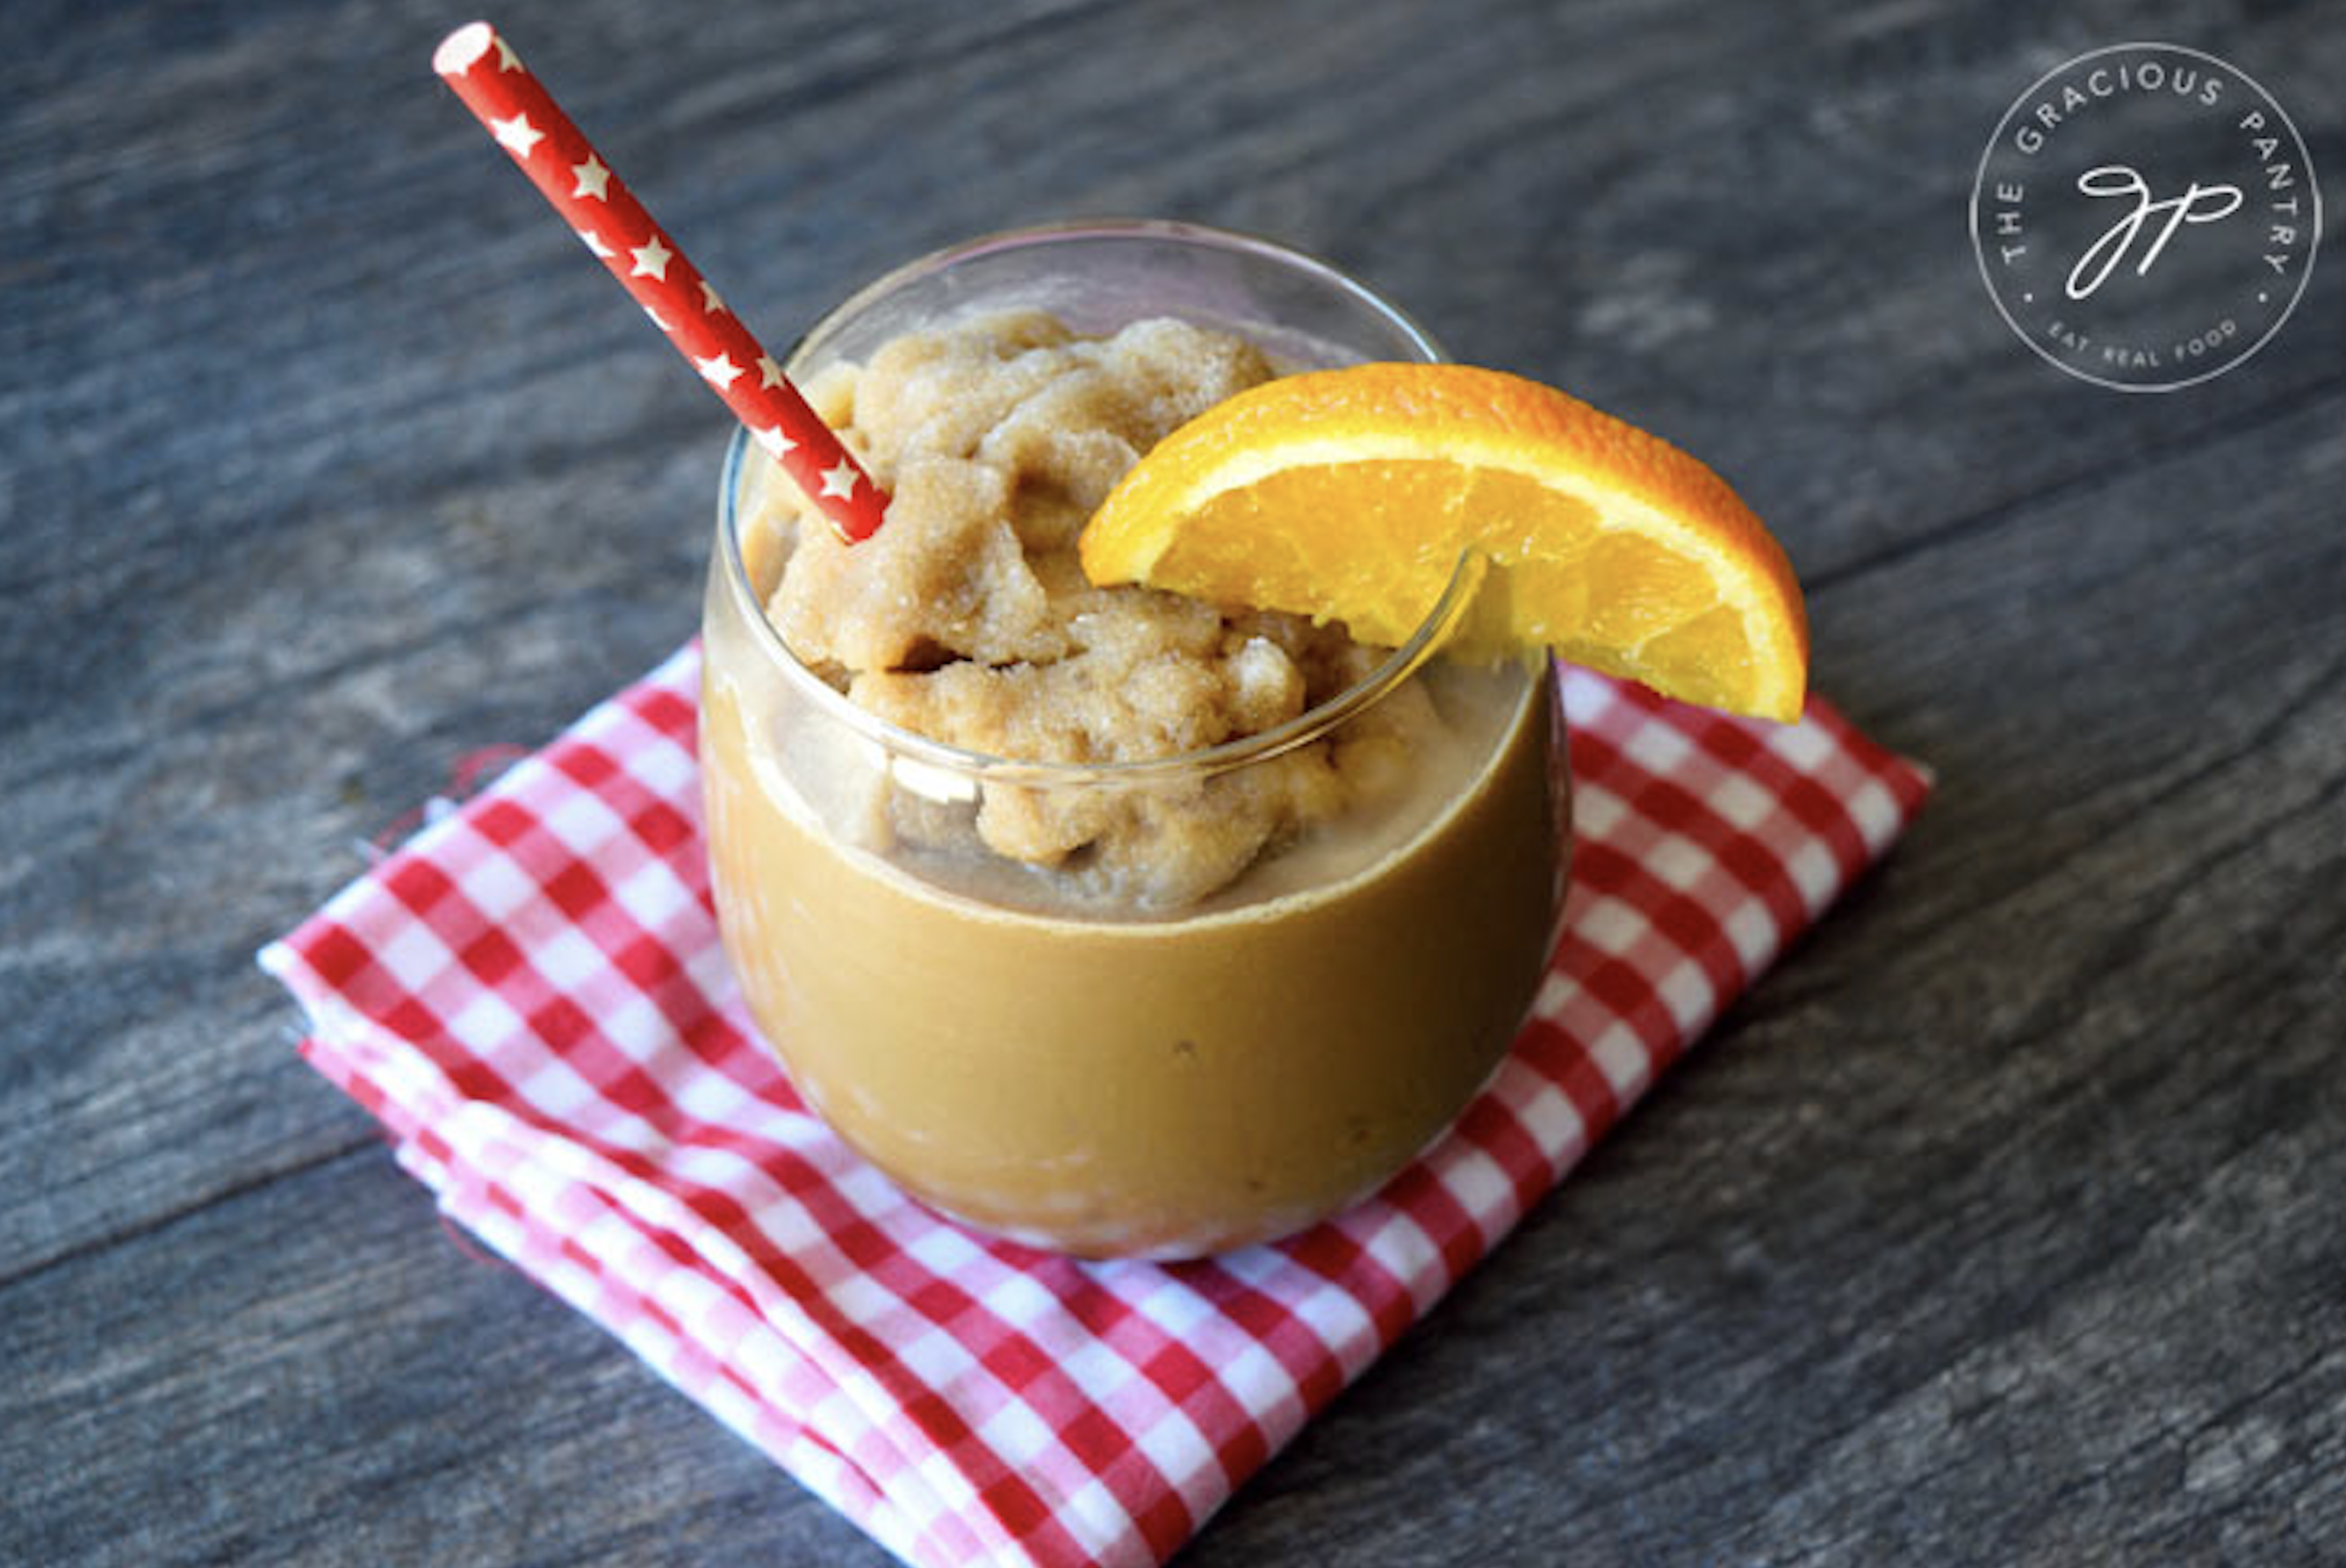 Prefer something cold and icy with fall flavors? This is the blended drink you want to try!<p><b><a href="https://www.thegraciouspantry.com/clean-eating-orange-maple-frappuccino-recipe/">Get Recipe</a></b></p>